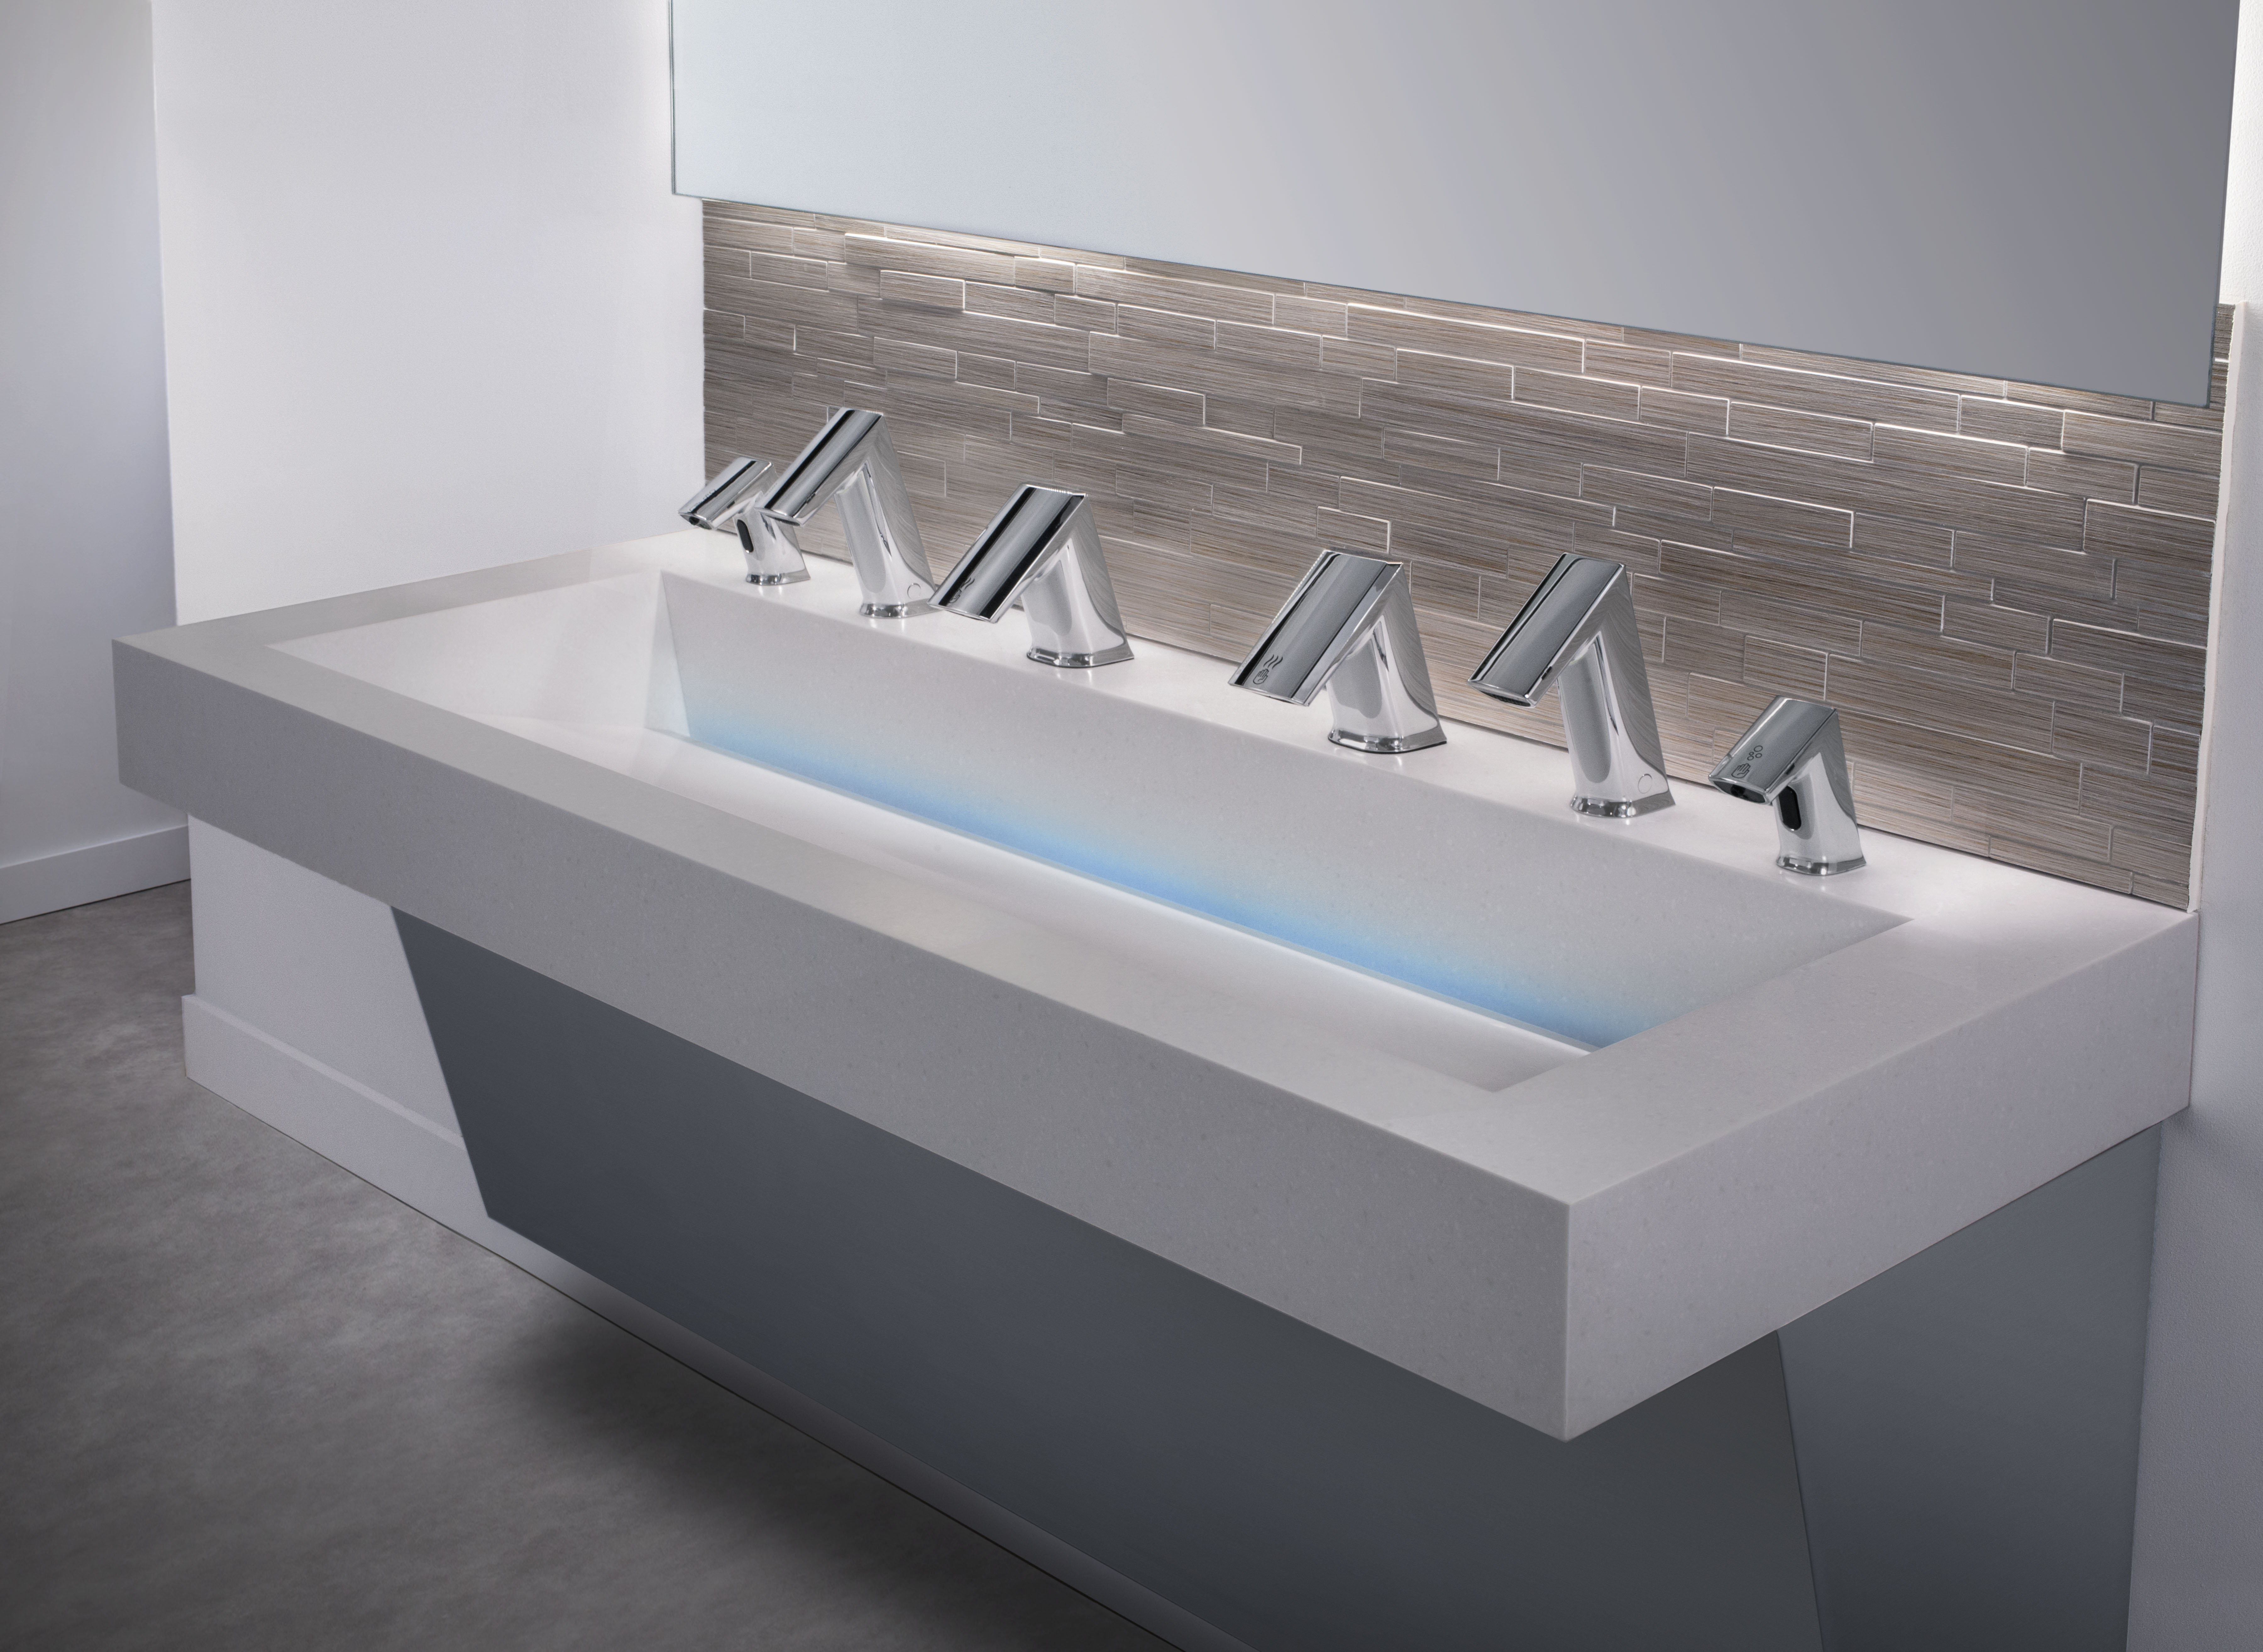 Раковина выполняет функцию. Washbasin tap. Integrated Sink. Wash свет. Difference between washbasin and Sink.